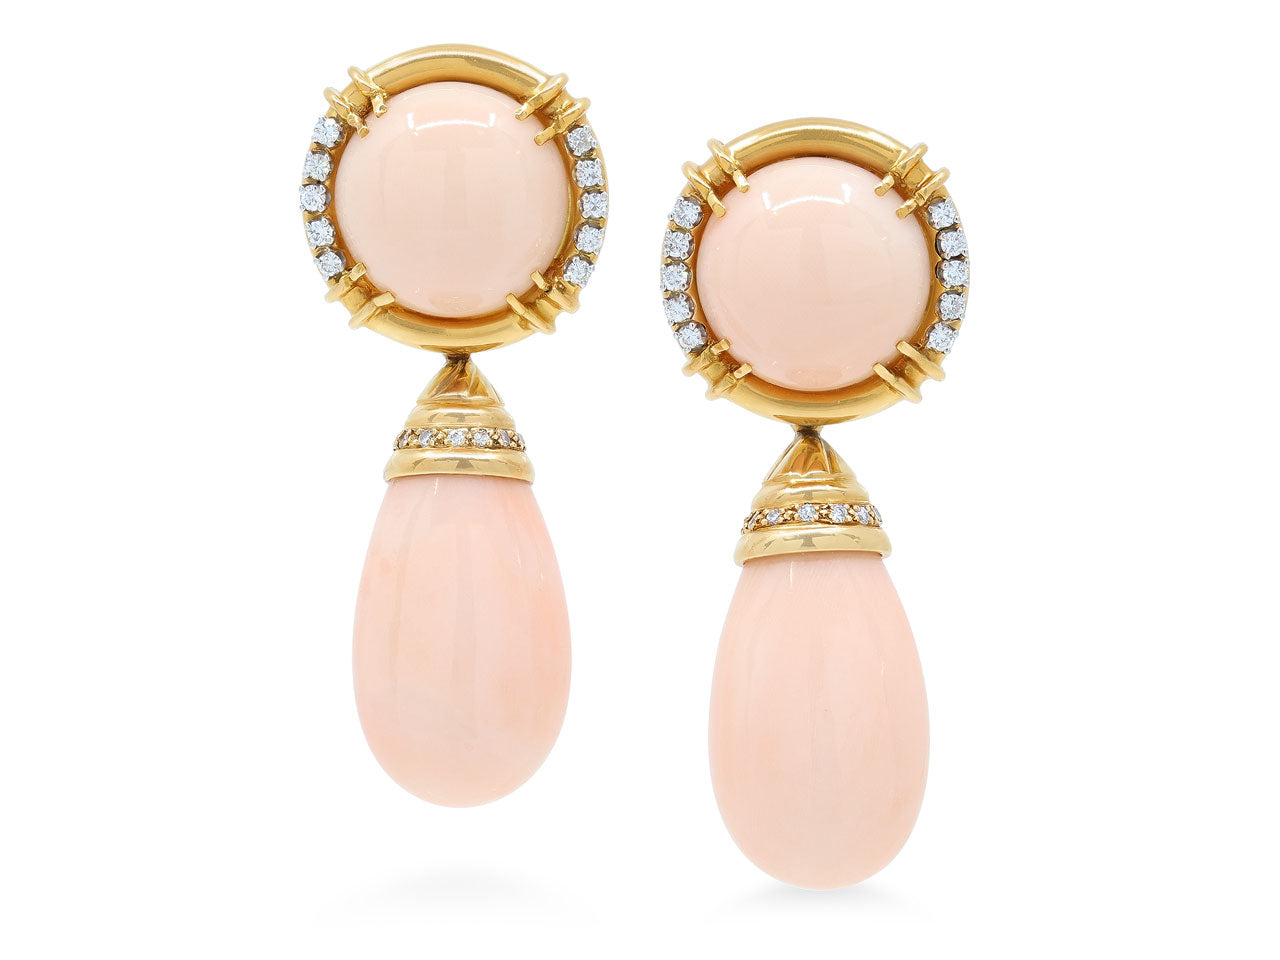 Gump's Diamond and Coral Earrings in 18K Gold